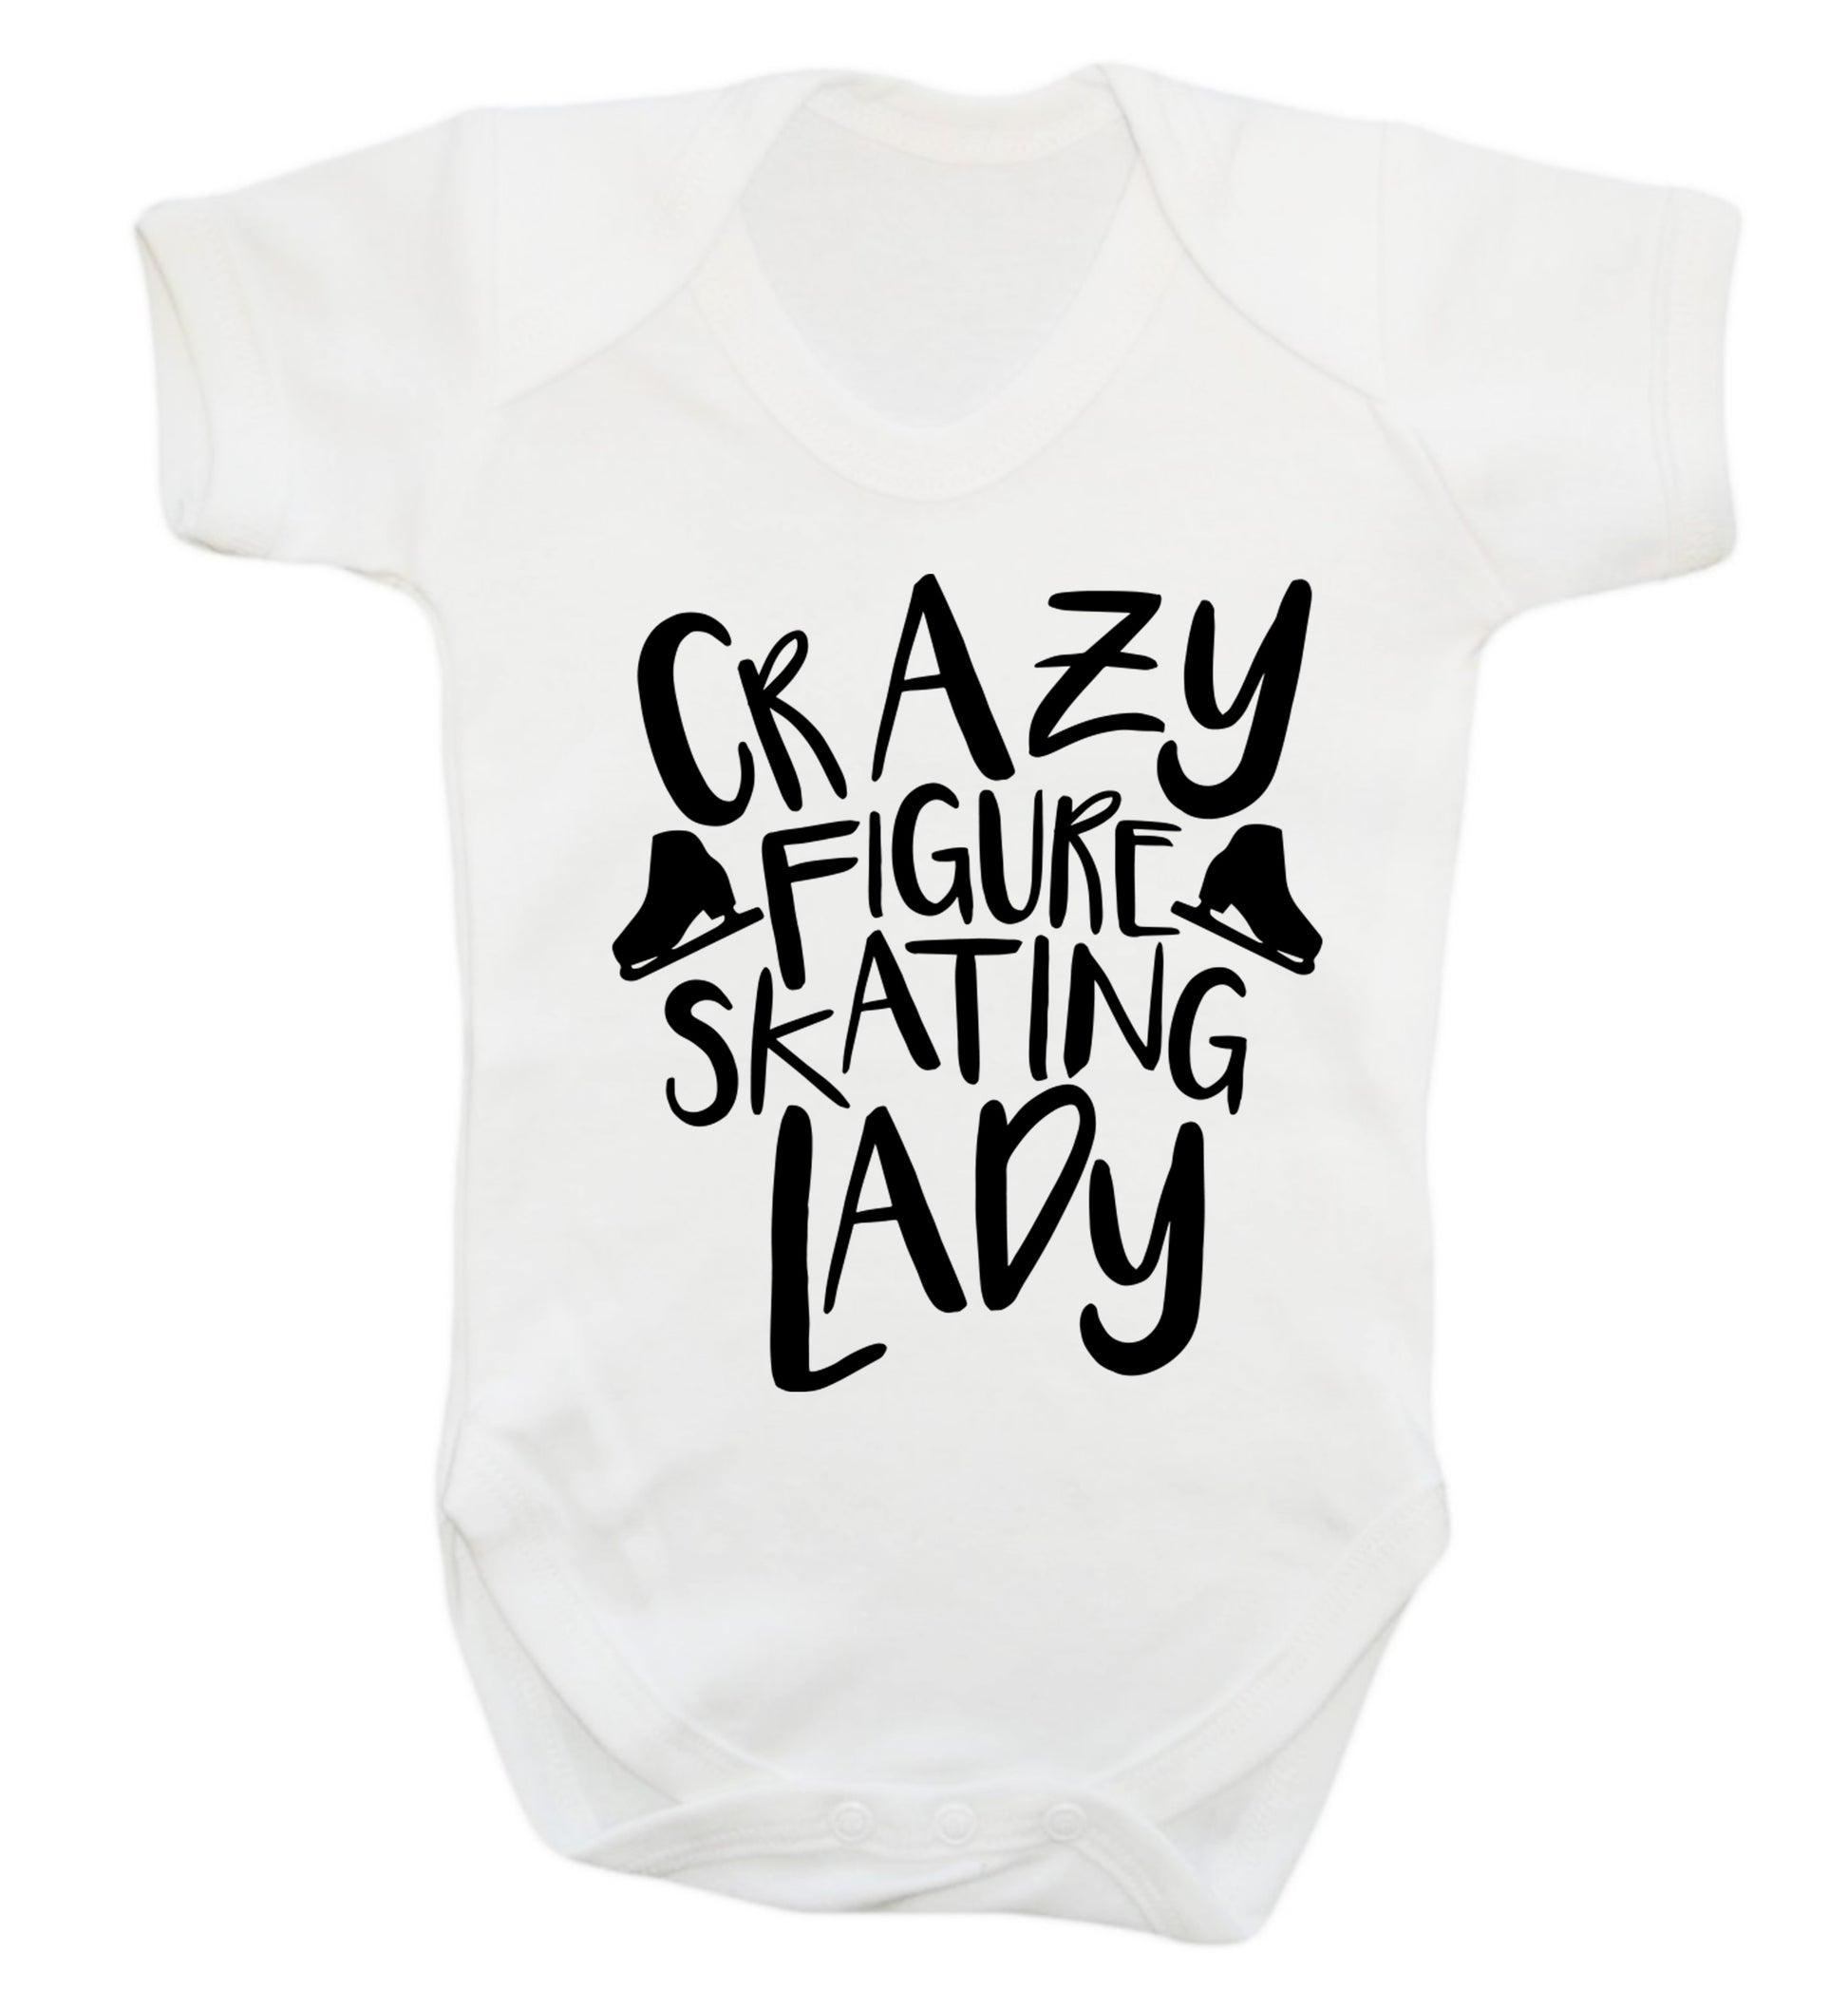 Crazy figure skating lady Baby Vest white 18-24 months